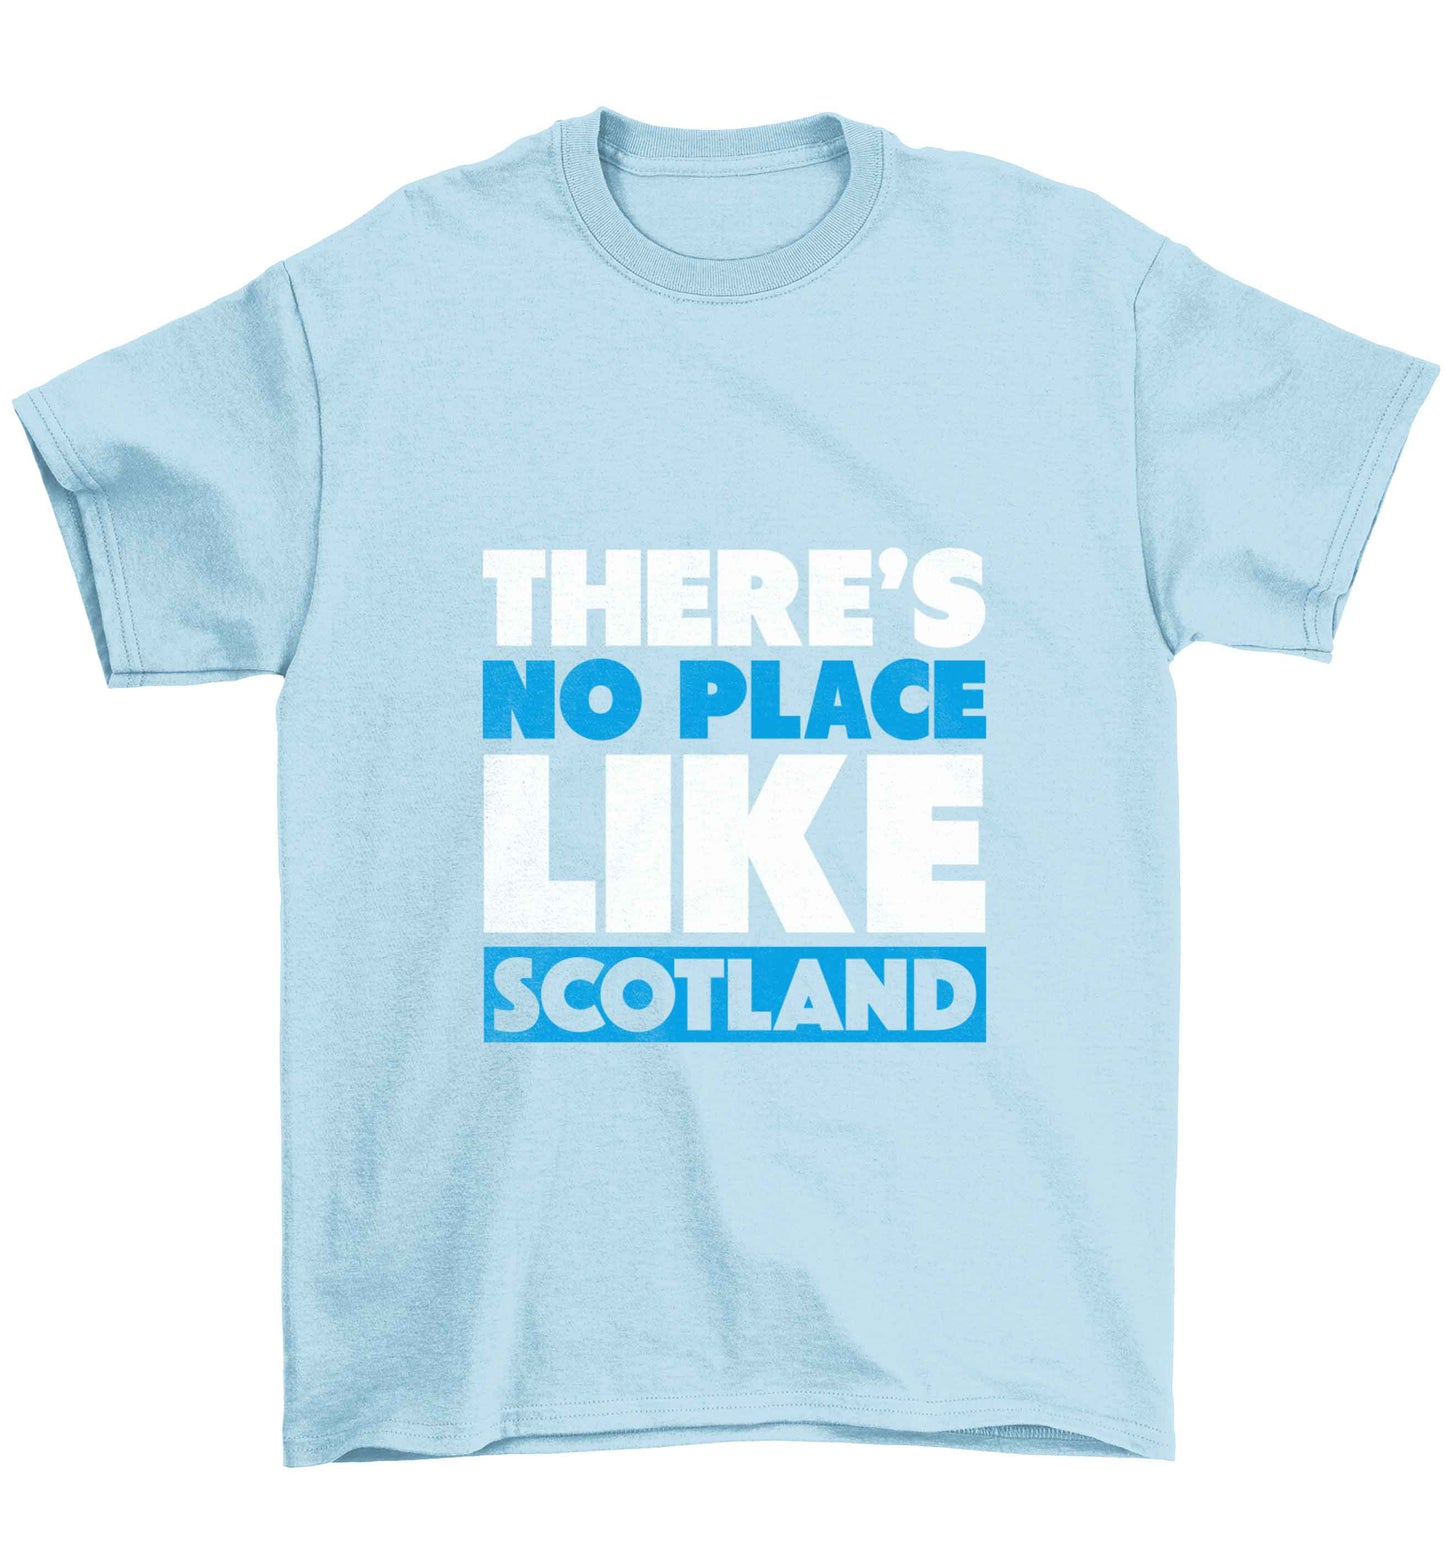 There's no place like Scotland Children's light blue Tshirt 12-13 Years